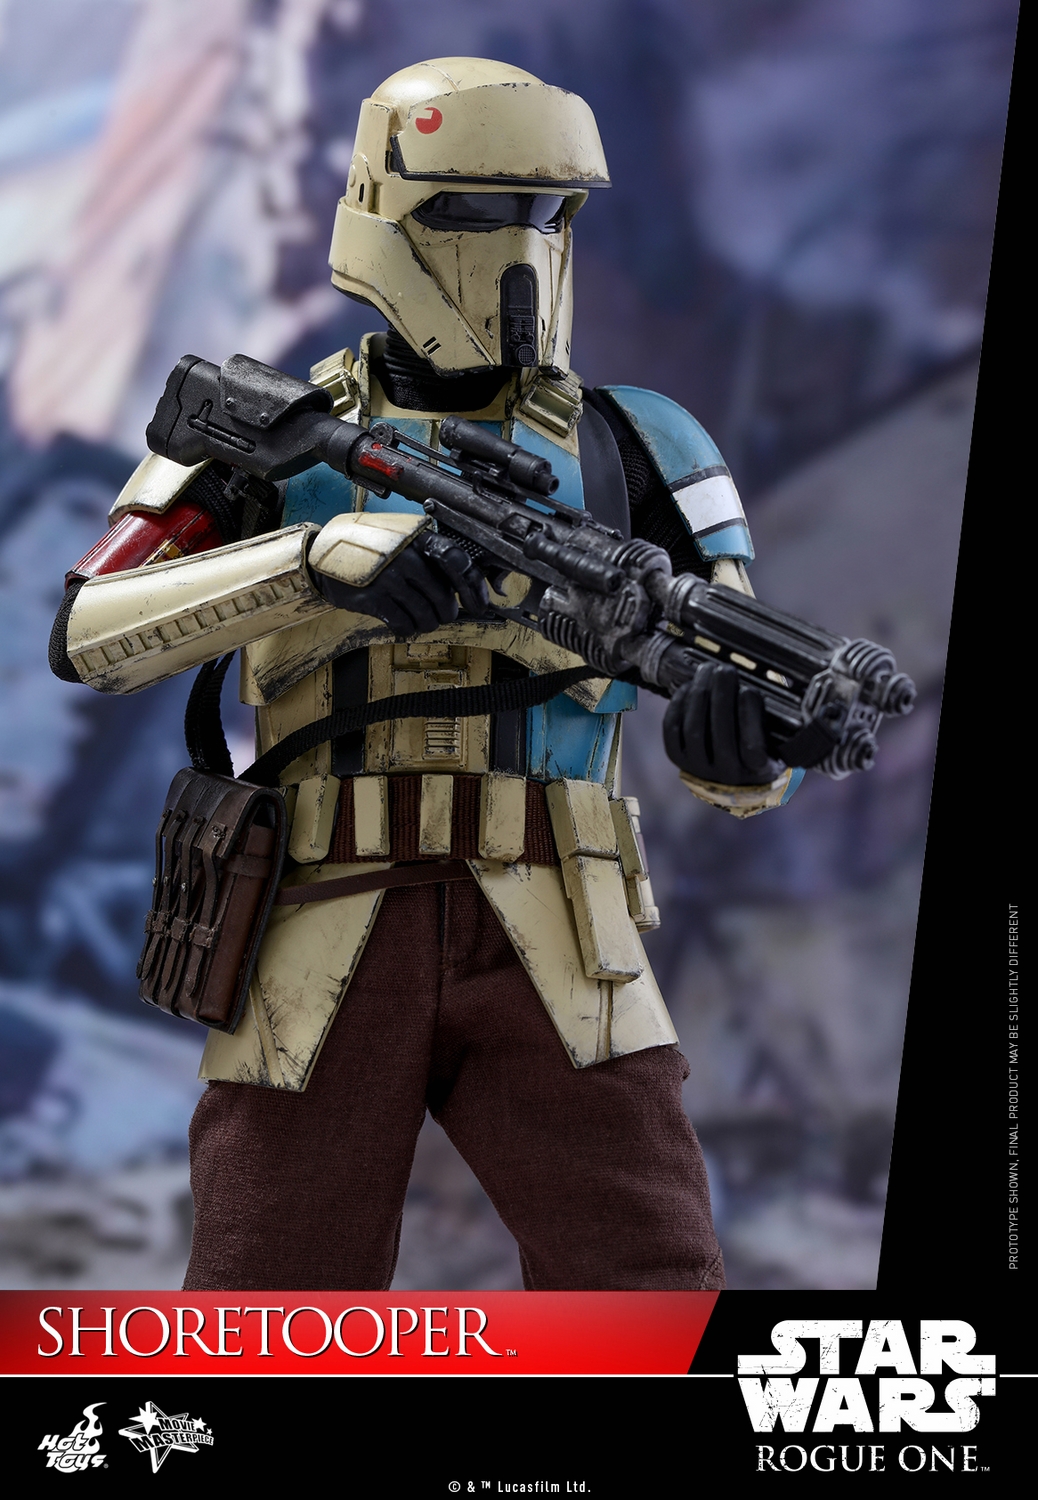 hot-toys-star-wars-rogue-one-shoretrooper-collectible-figure-092916-003.jpg